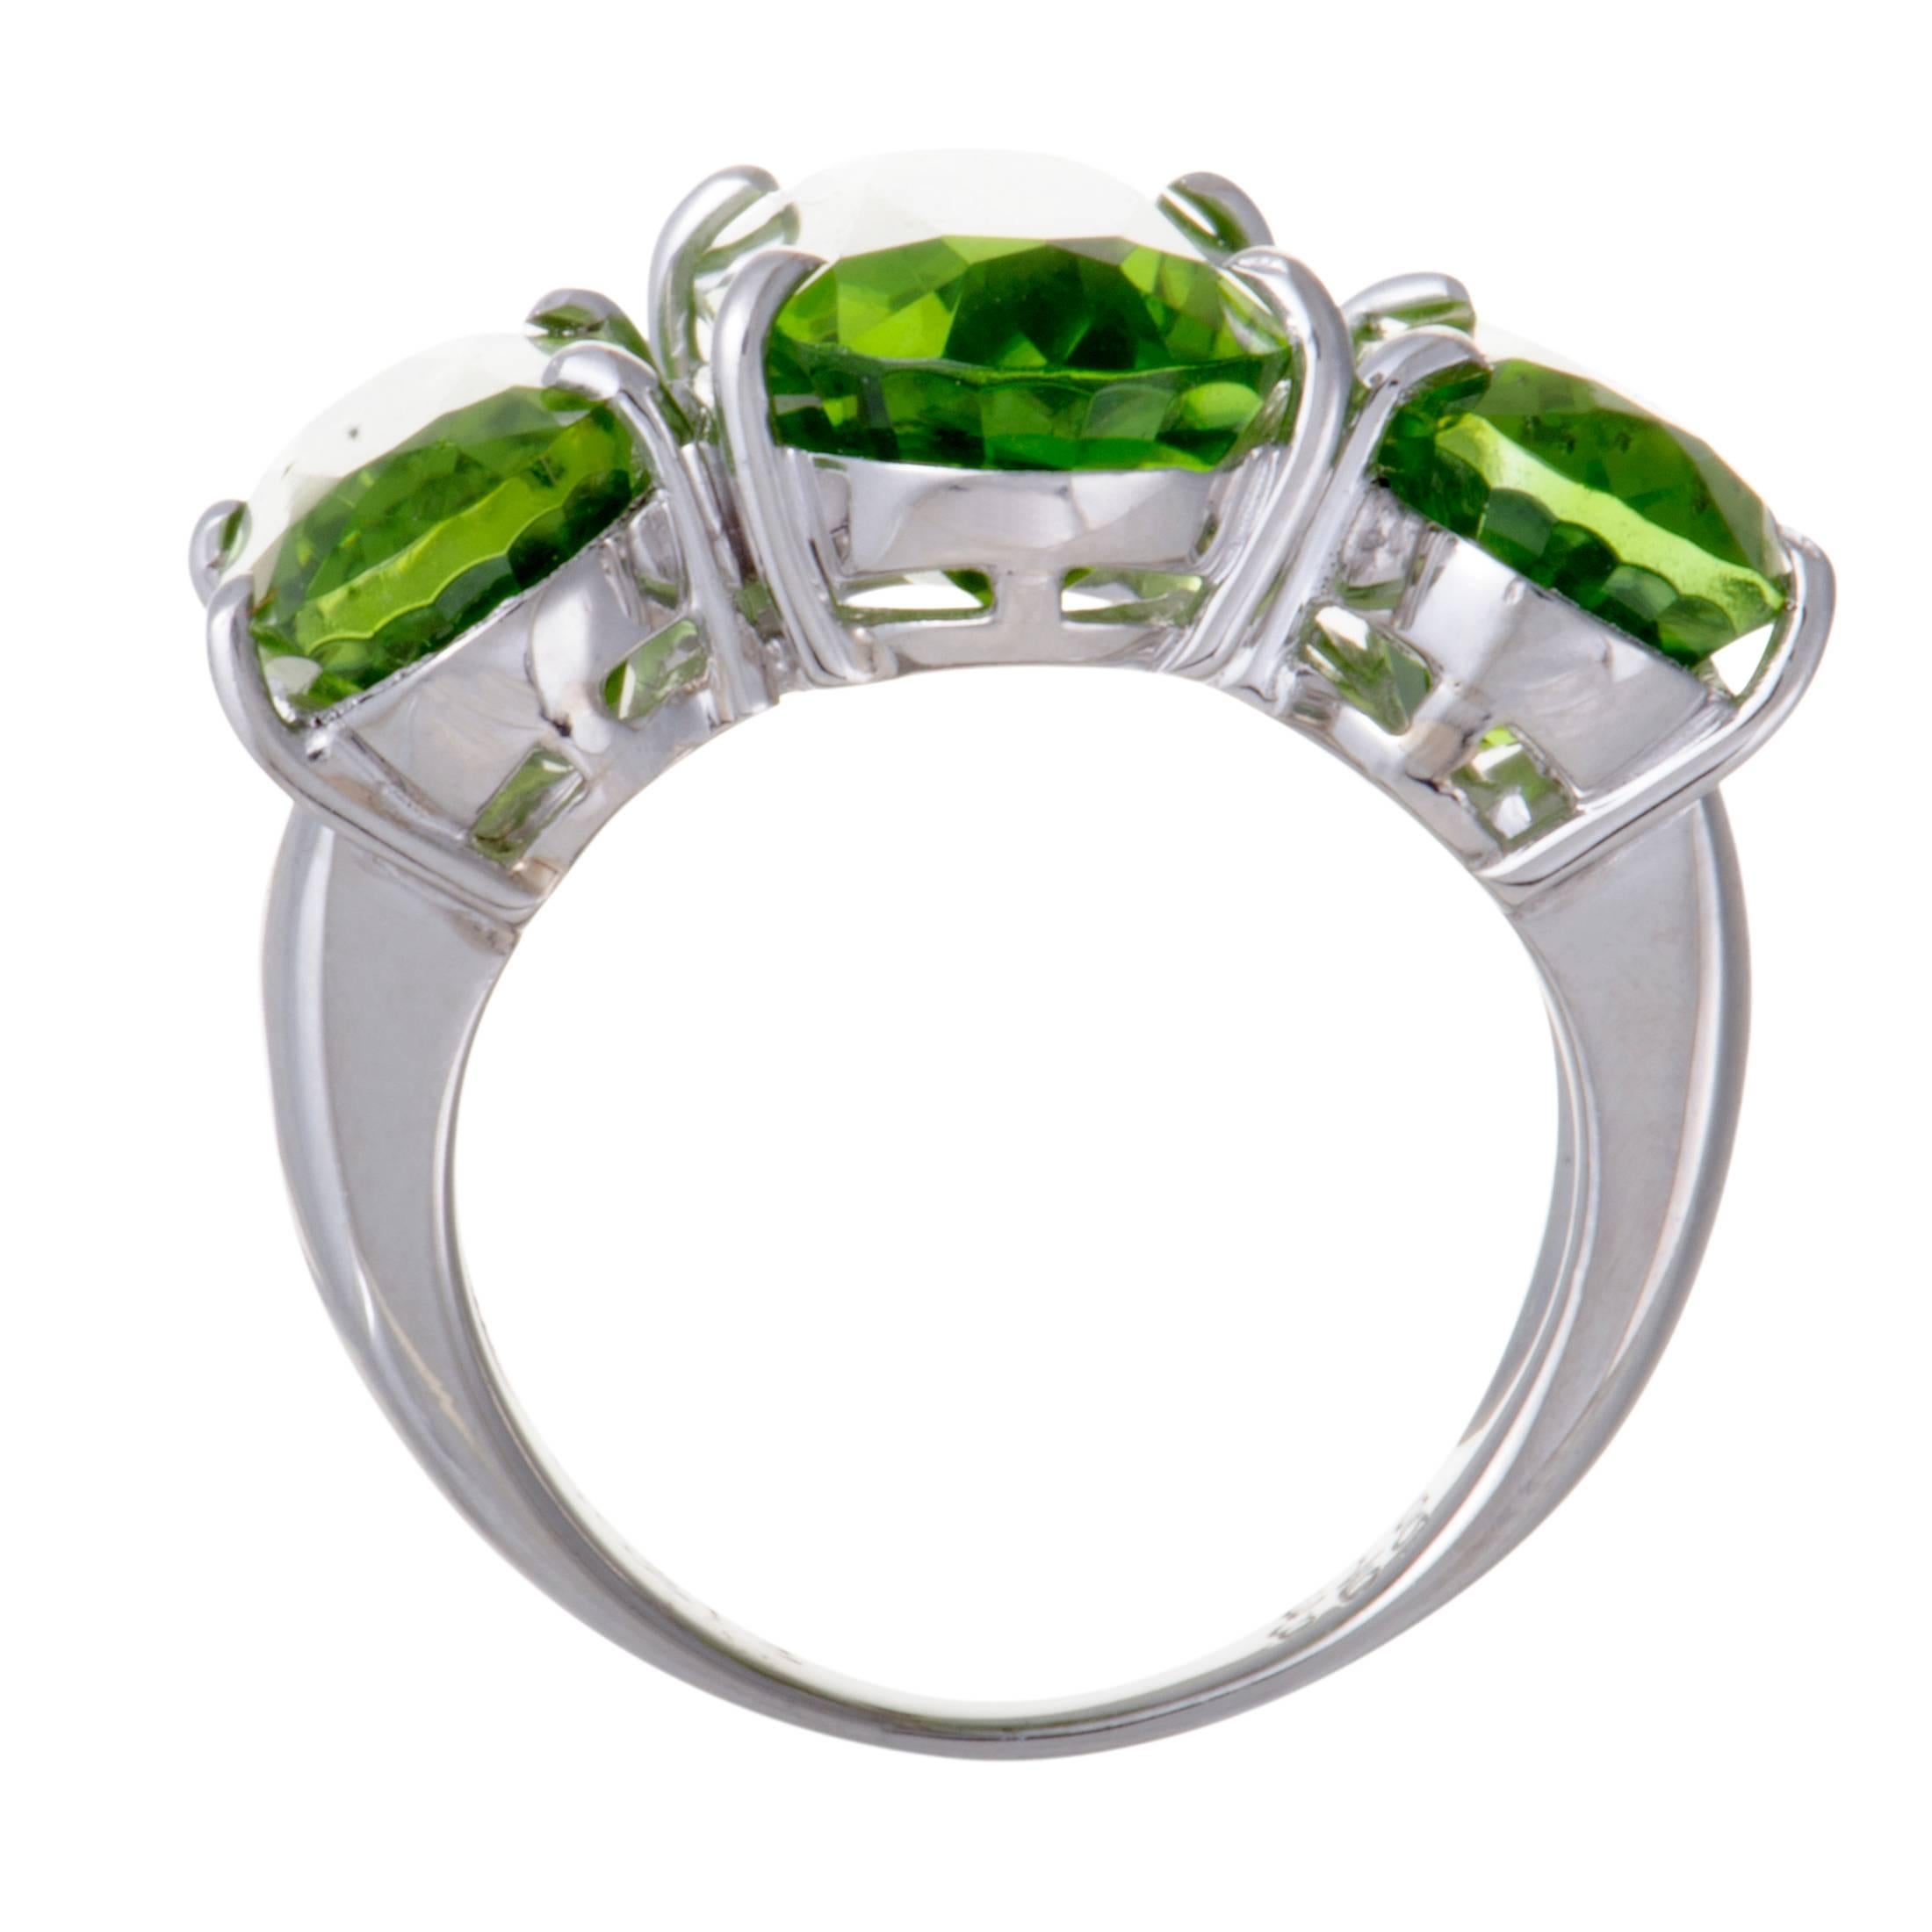 Stealing the show in an exceptionally imposing manner, the peridot stones stand out magnificently against the prestigious gleam of platinum in this fabulous ring. The peridots amount to 22.41 carats, and the ring also boasts 0.21 carats of sumptuous